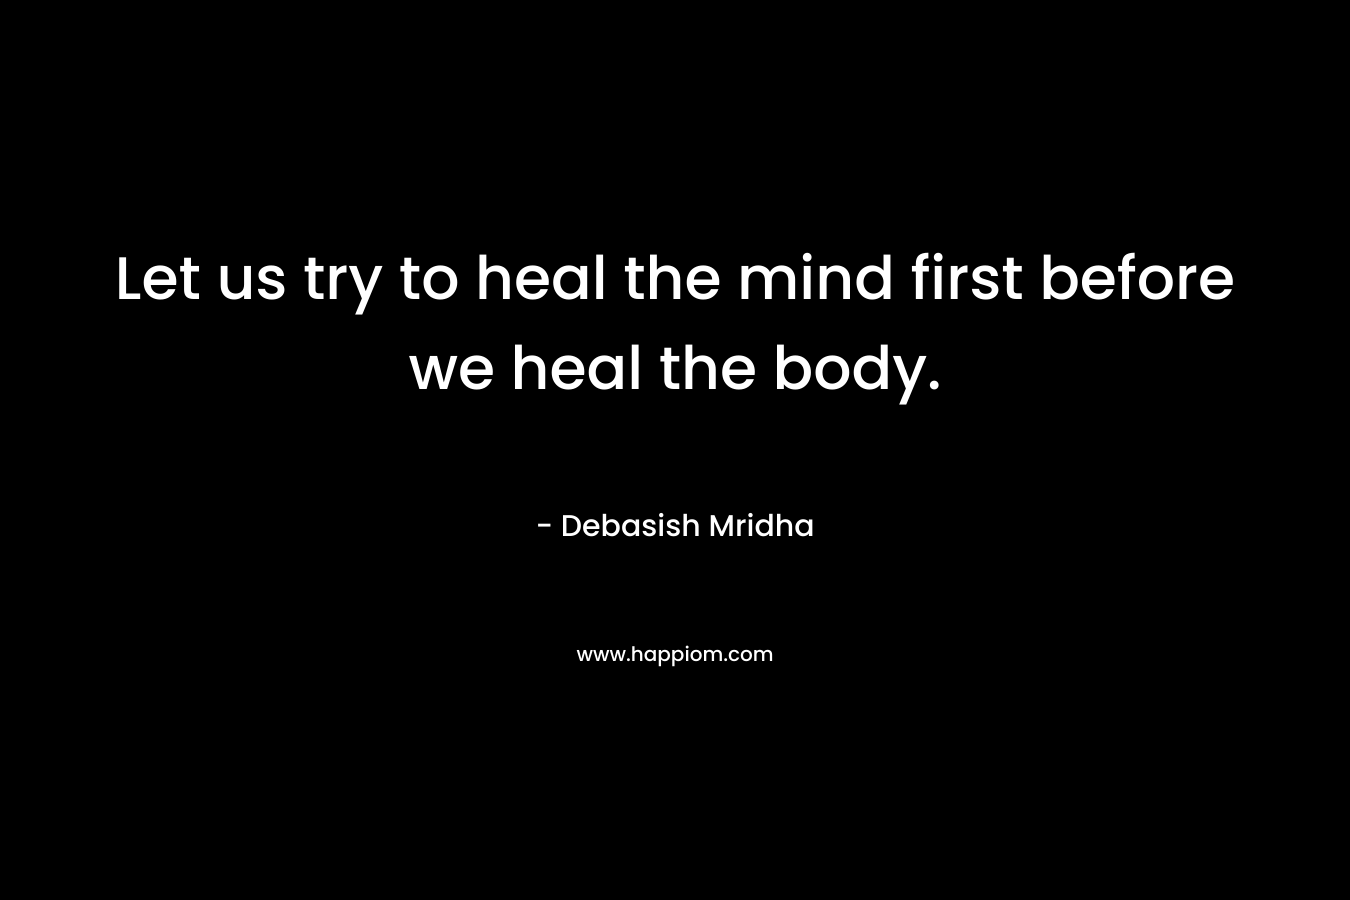 Let us try to heal the mind first before we heal the body.